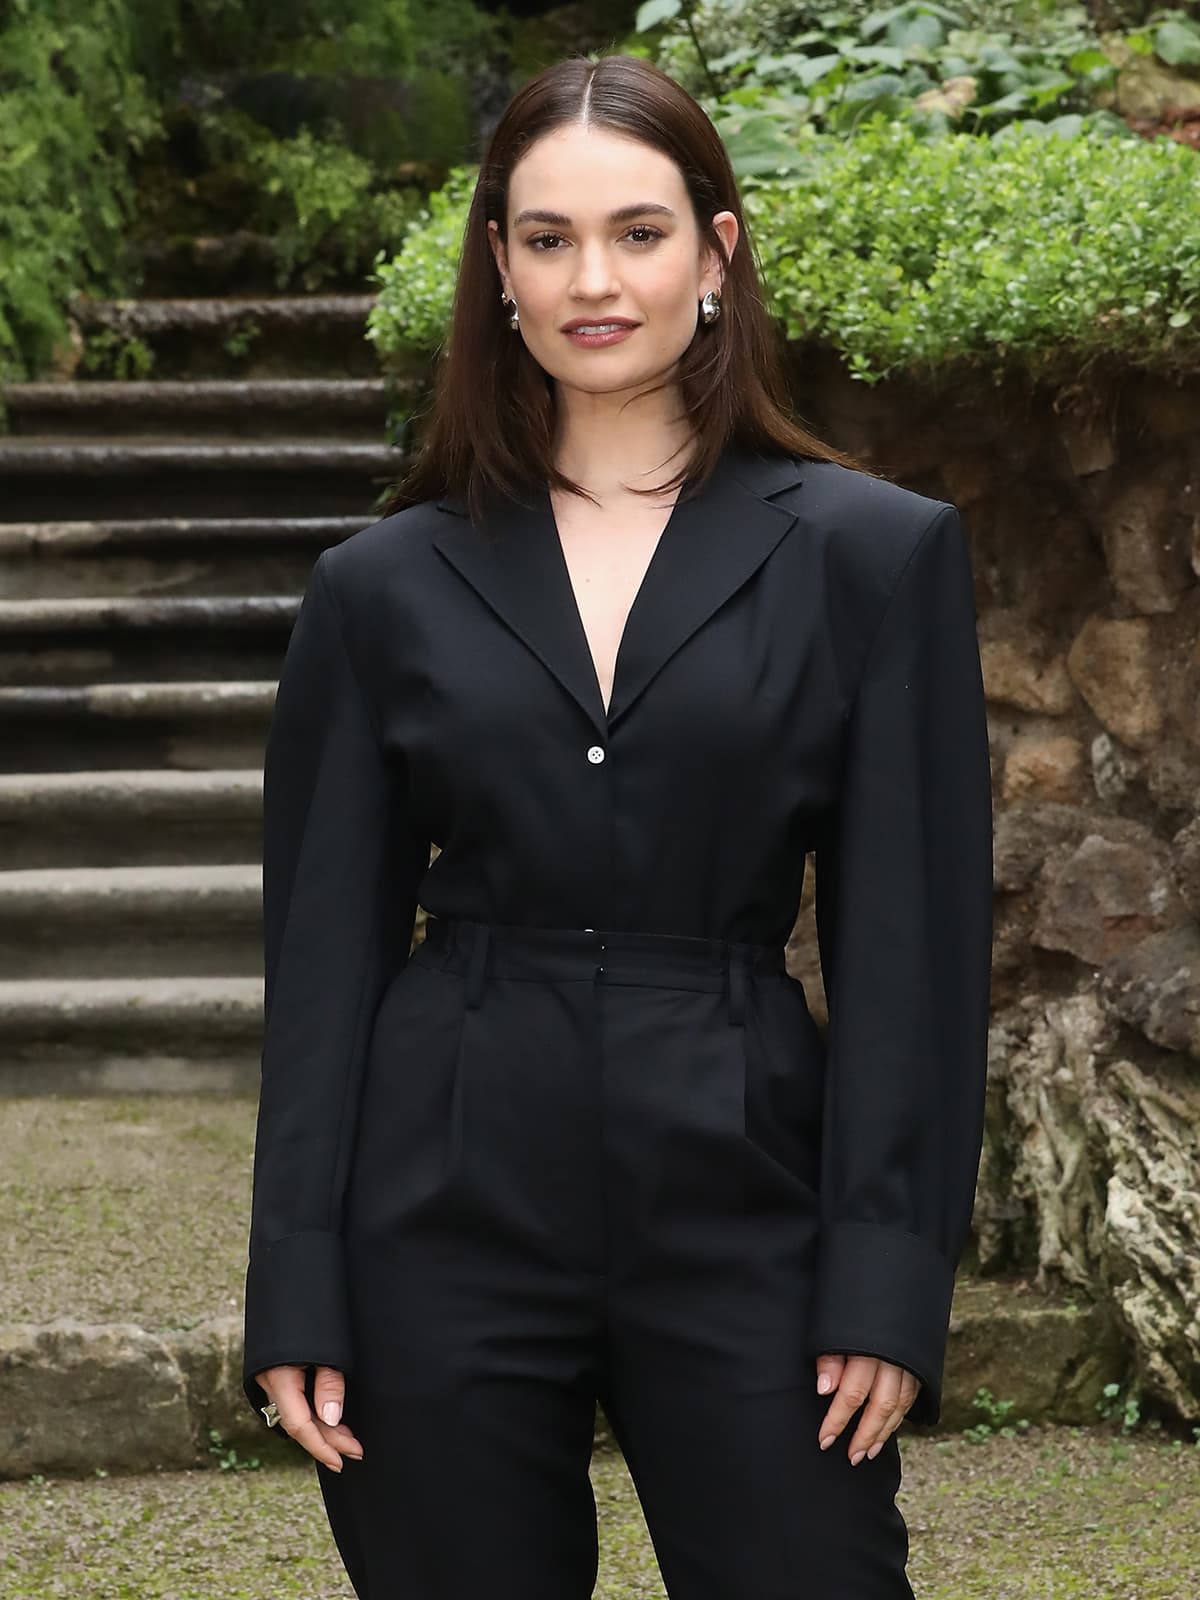 Lily James keeps her jewelry simple and enhances her lovely facial features with minimal makeup